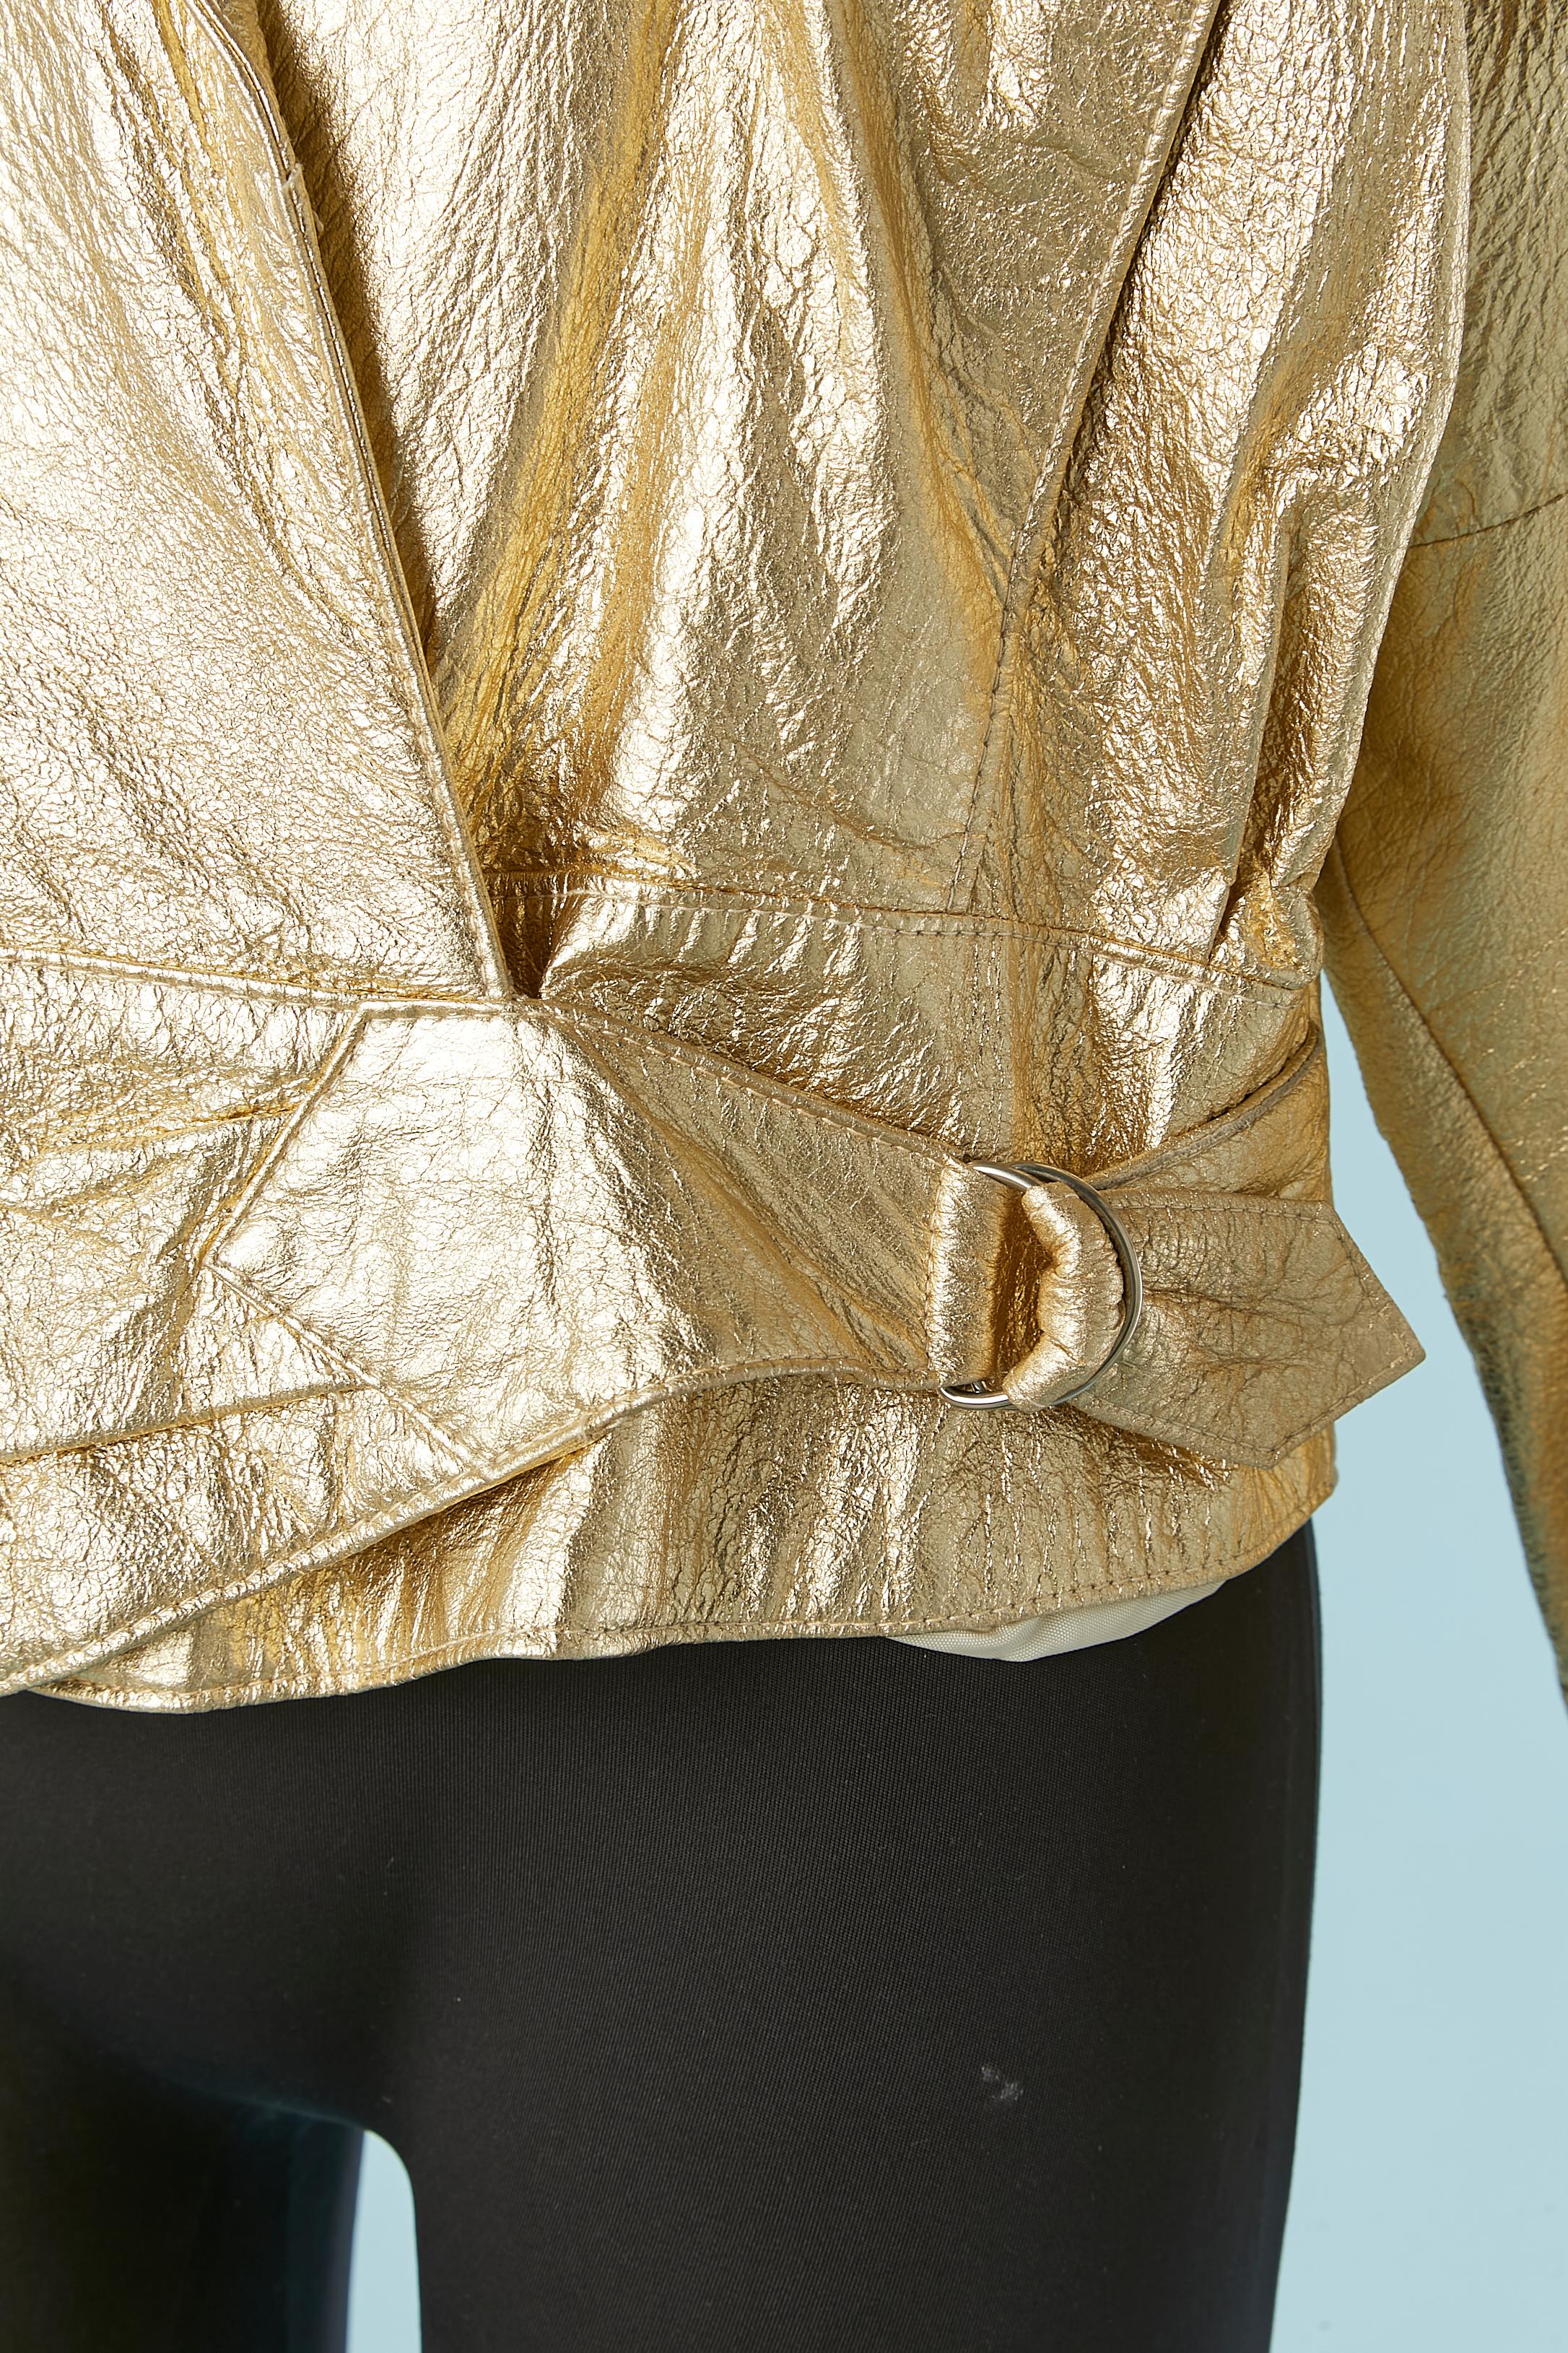 Gold wrinkled leather jacket with buckle on the waist with rayon or acetate lining. 
Pocket on both side.
SIZE M 